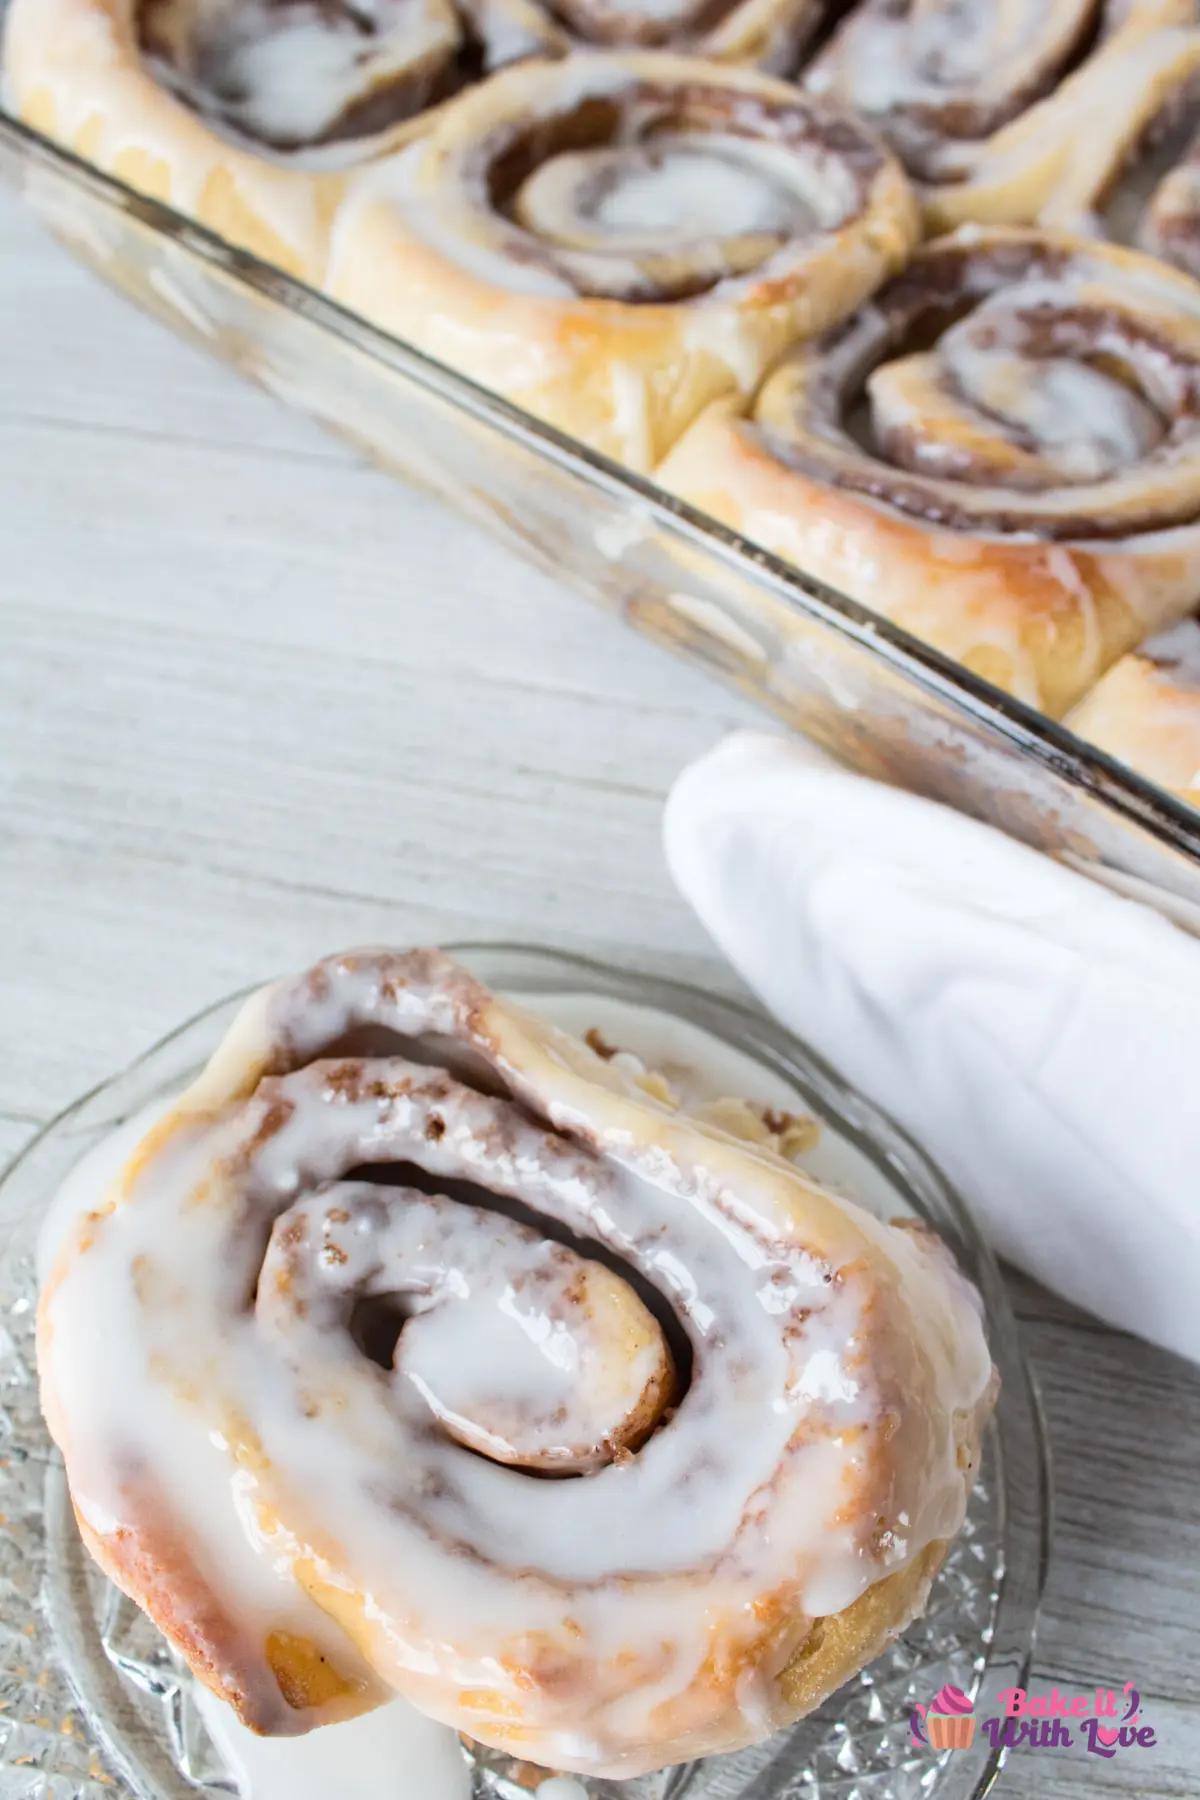 Tall image of cinnamon rolls with icing.